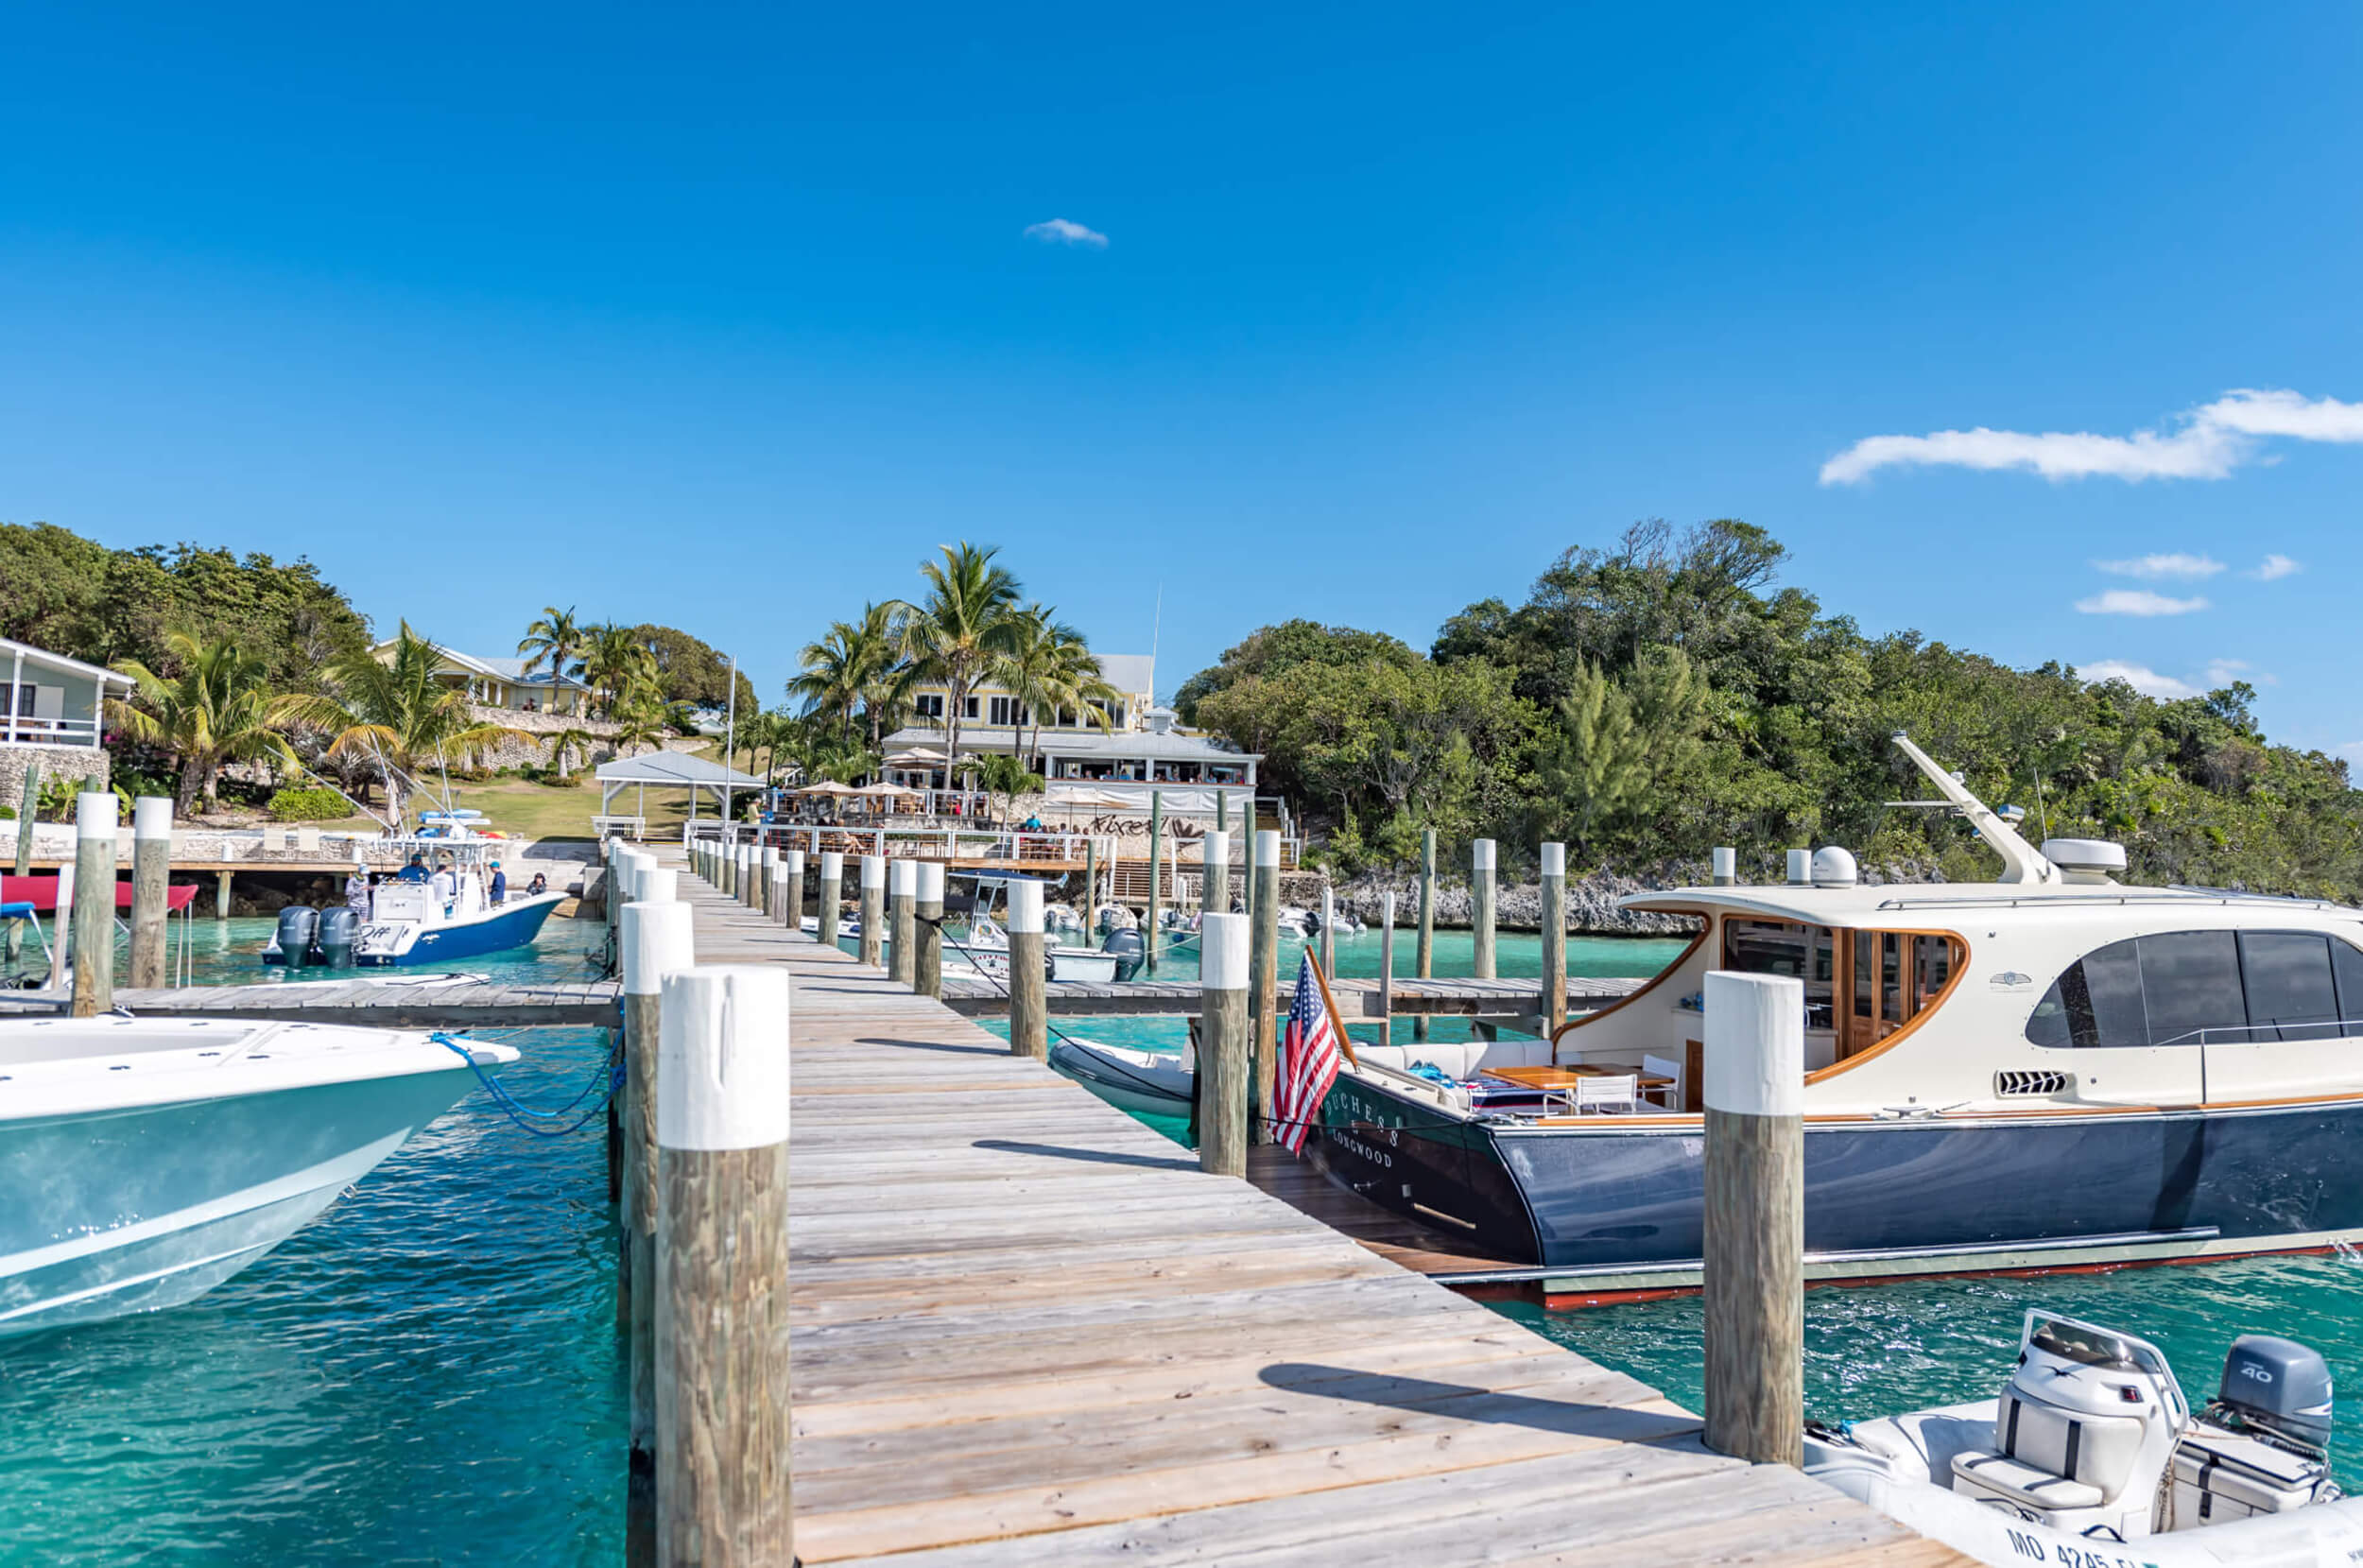 Boat dock at The Abaco Club